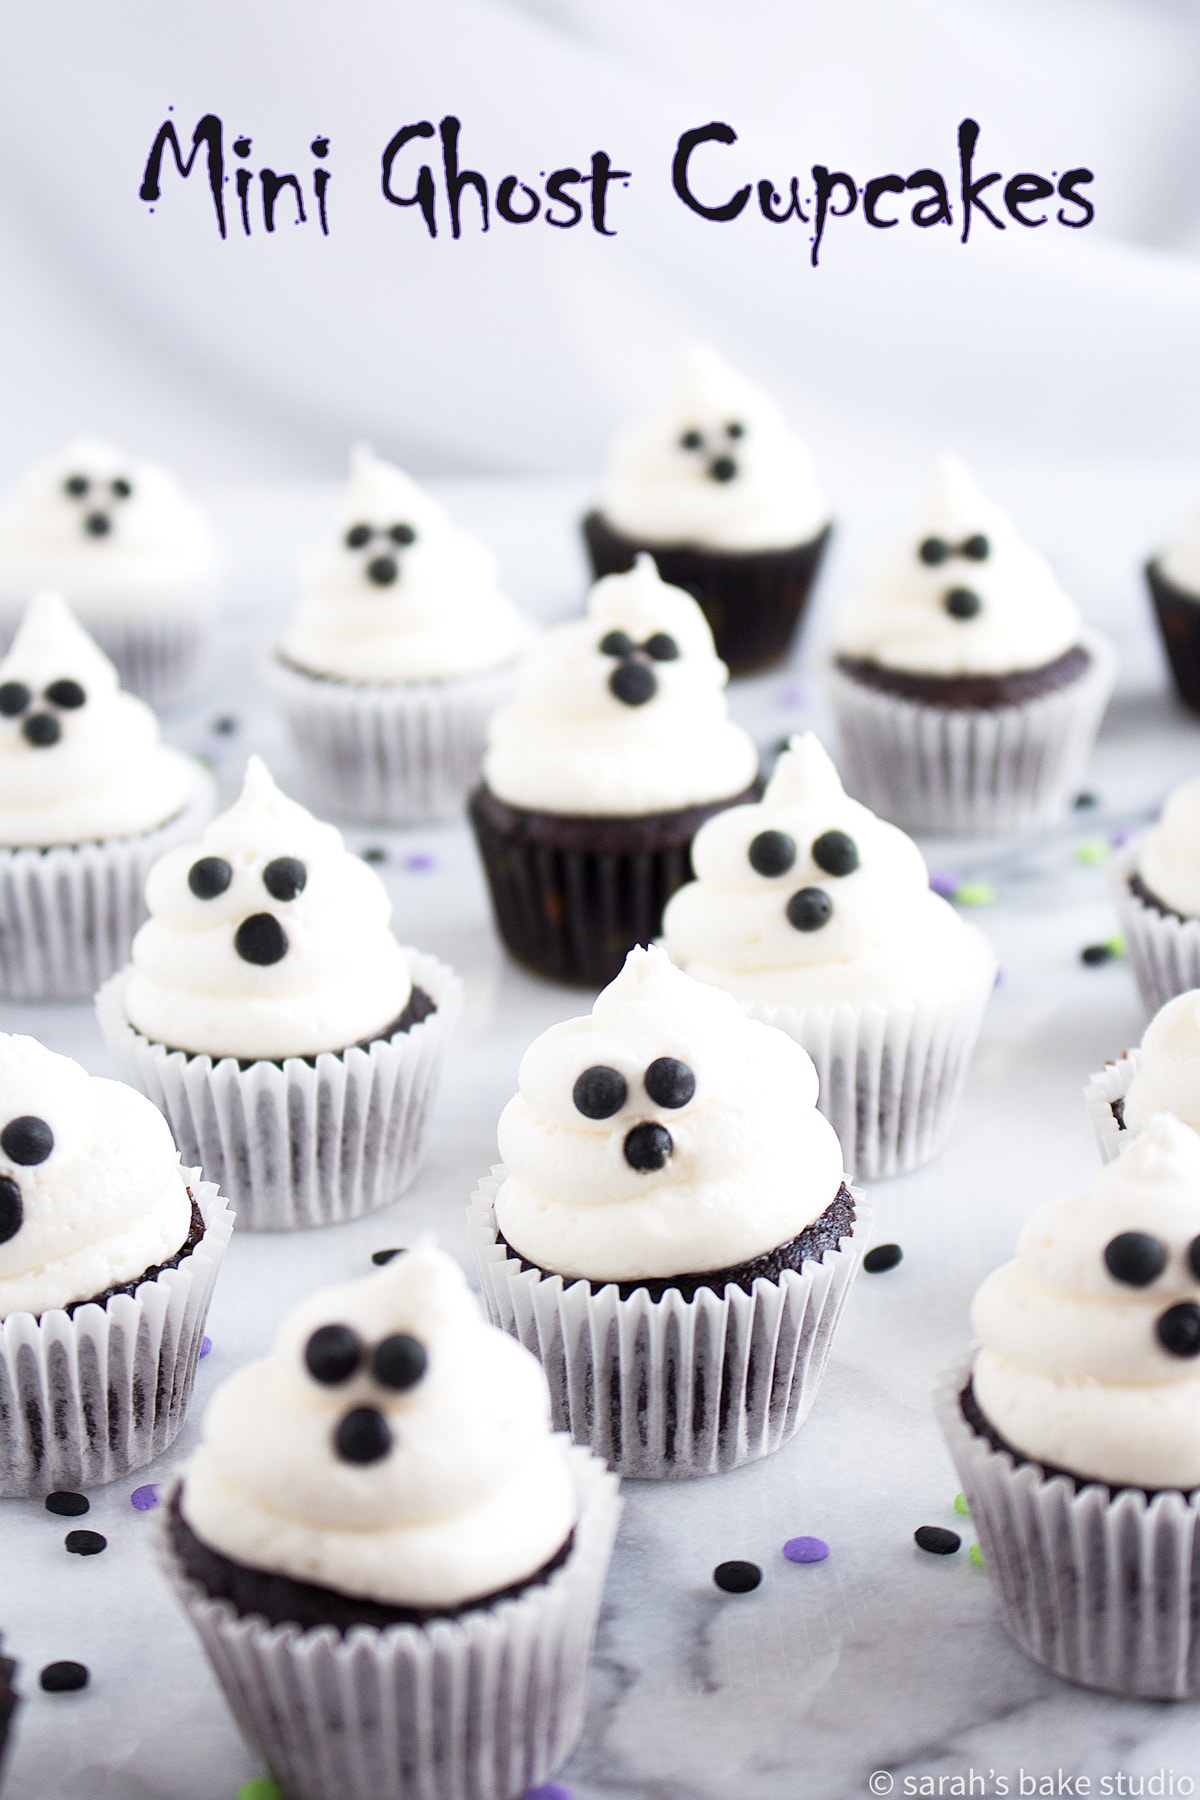 A front view of Mini Ghost Cupcakes.